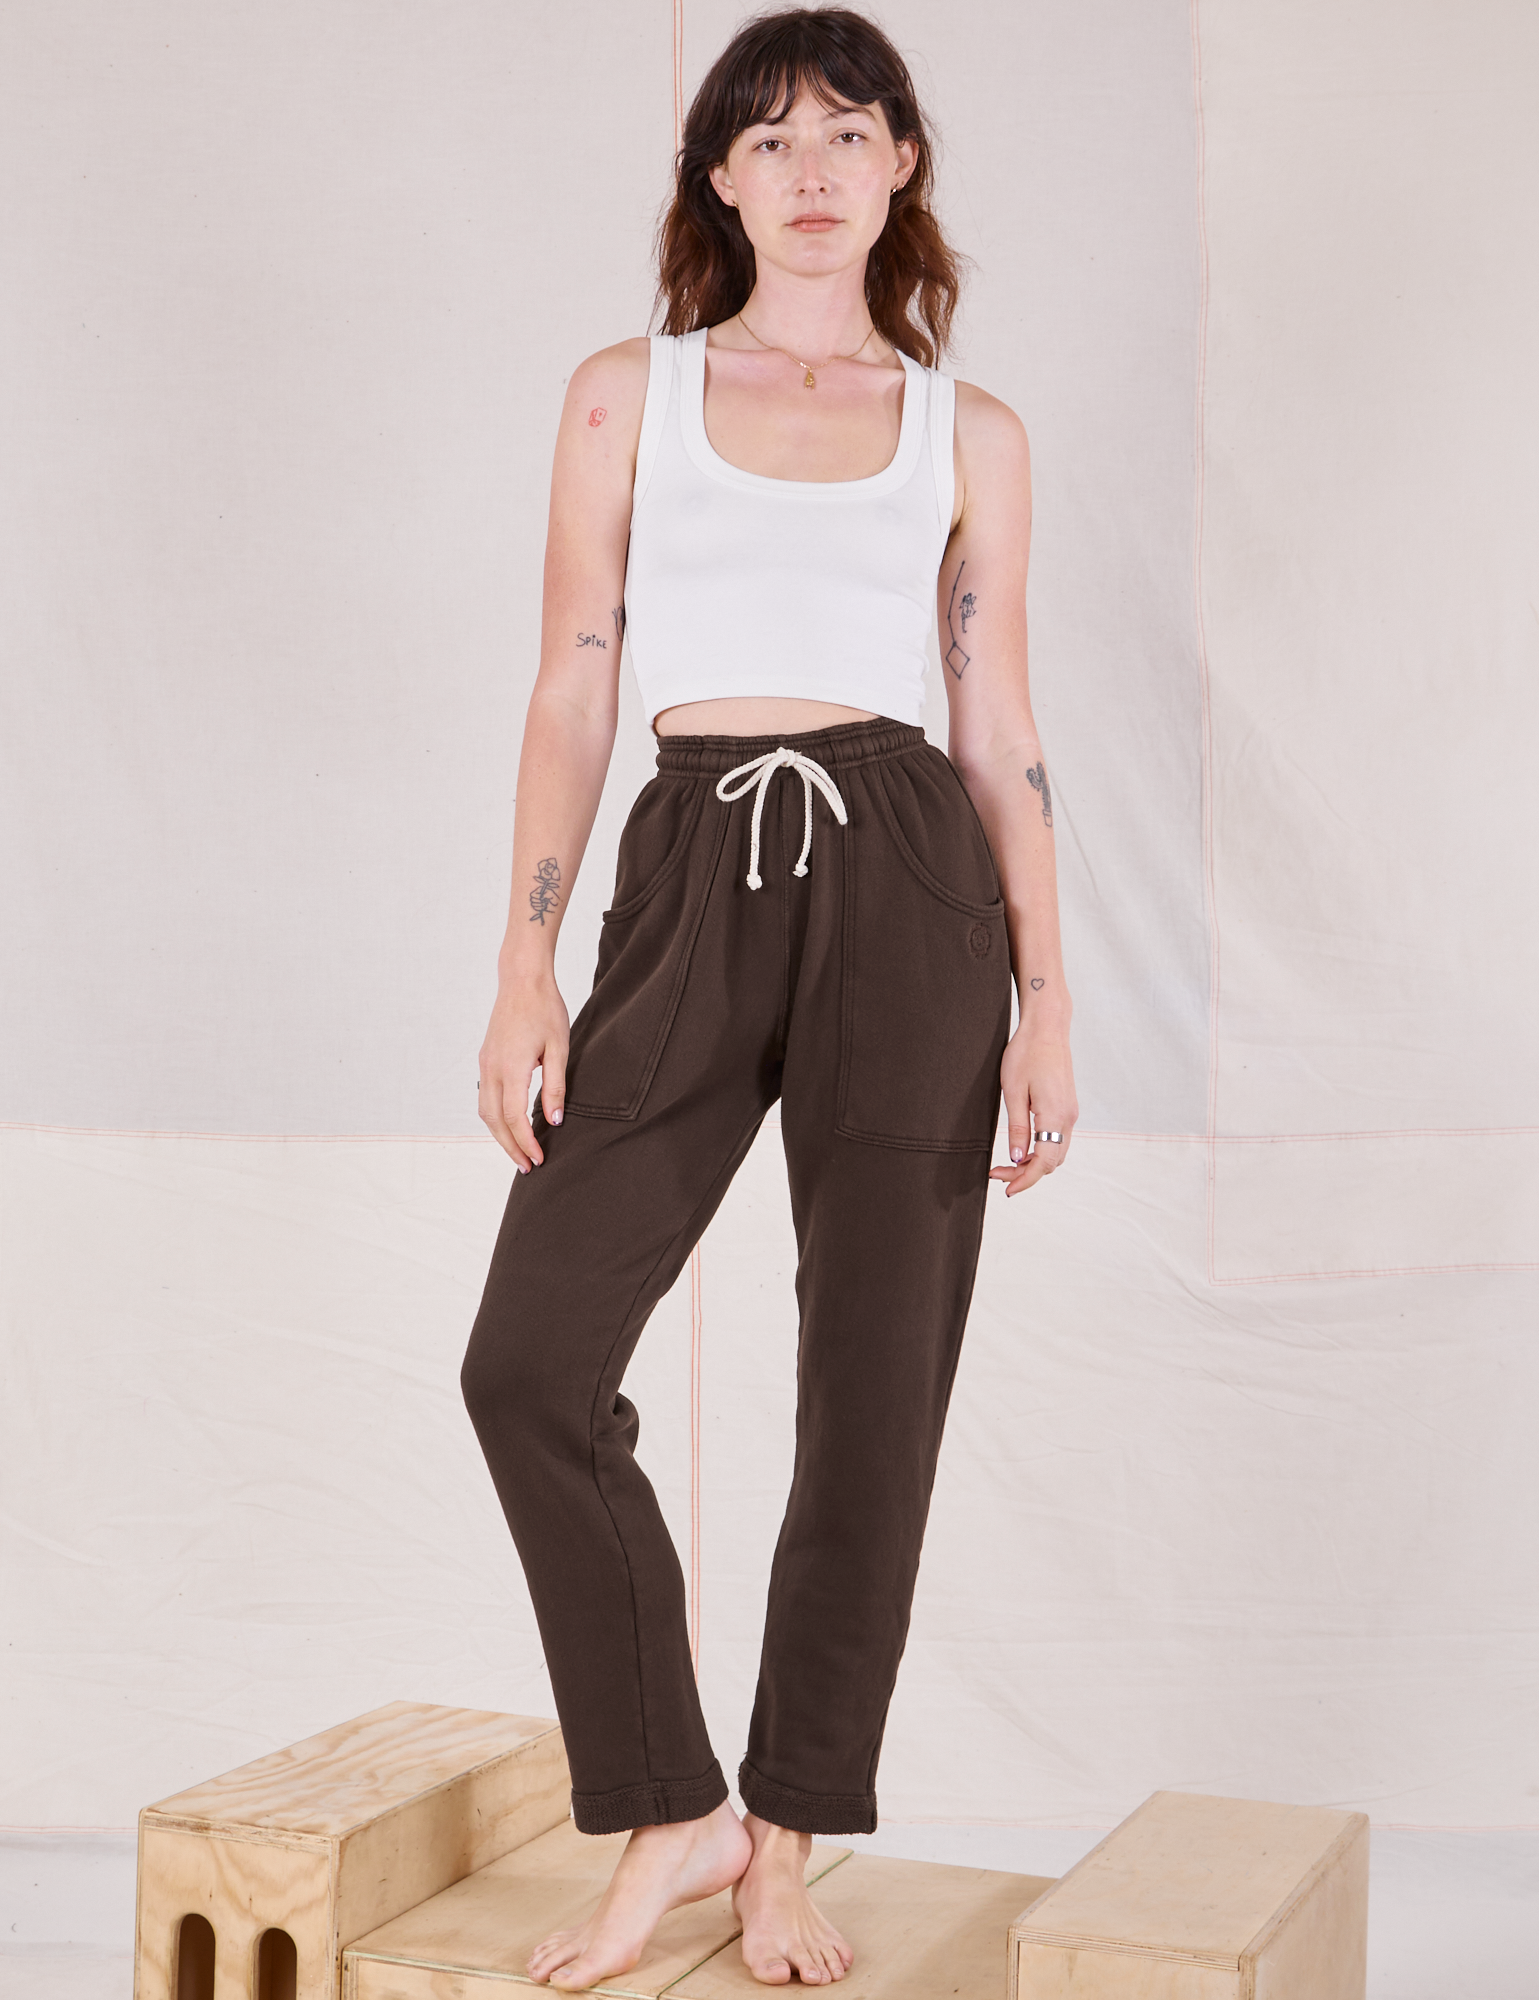 Alex is 5&#39;8&quot; and wearing P Rolled Cuff Sweat Pants in Espresso Brown paired with vintage off-white Cropped Tank